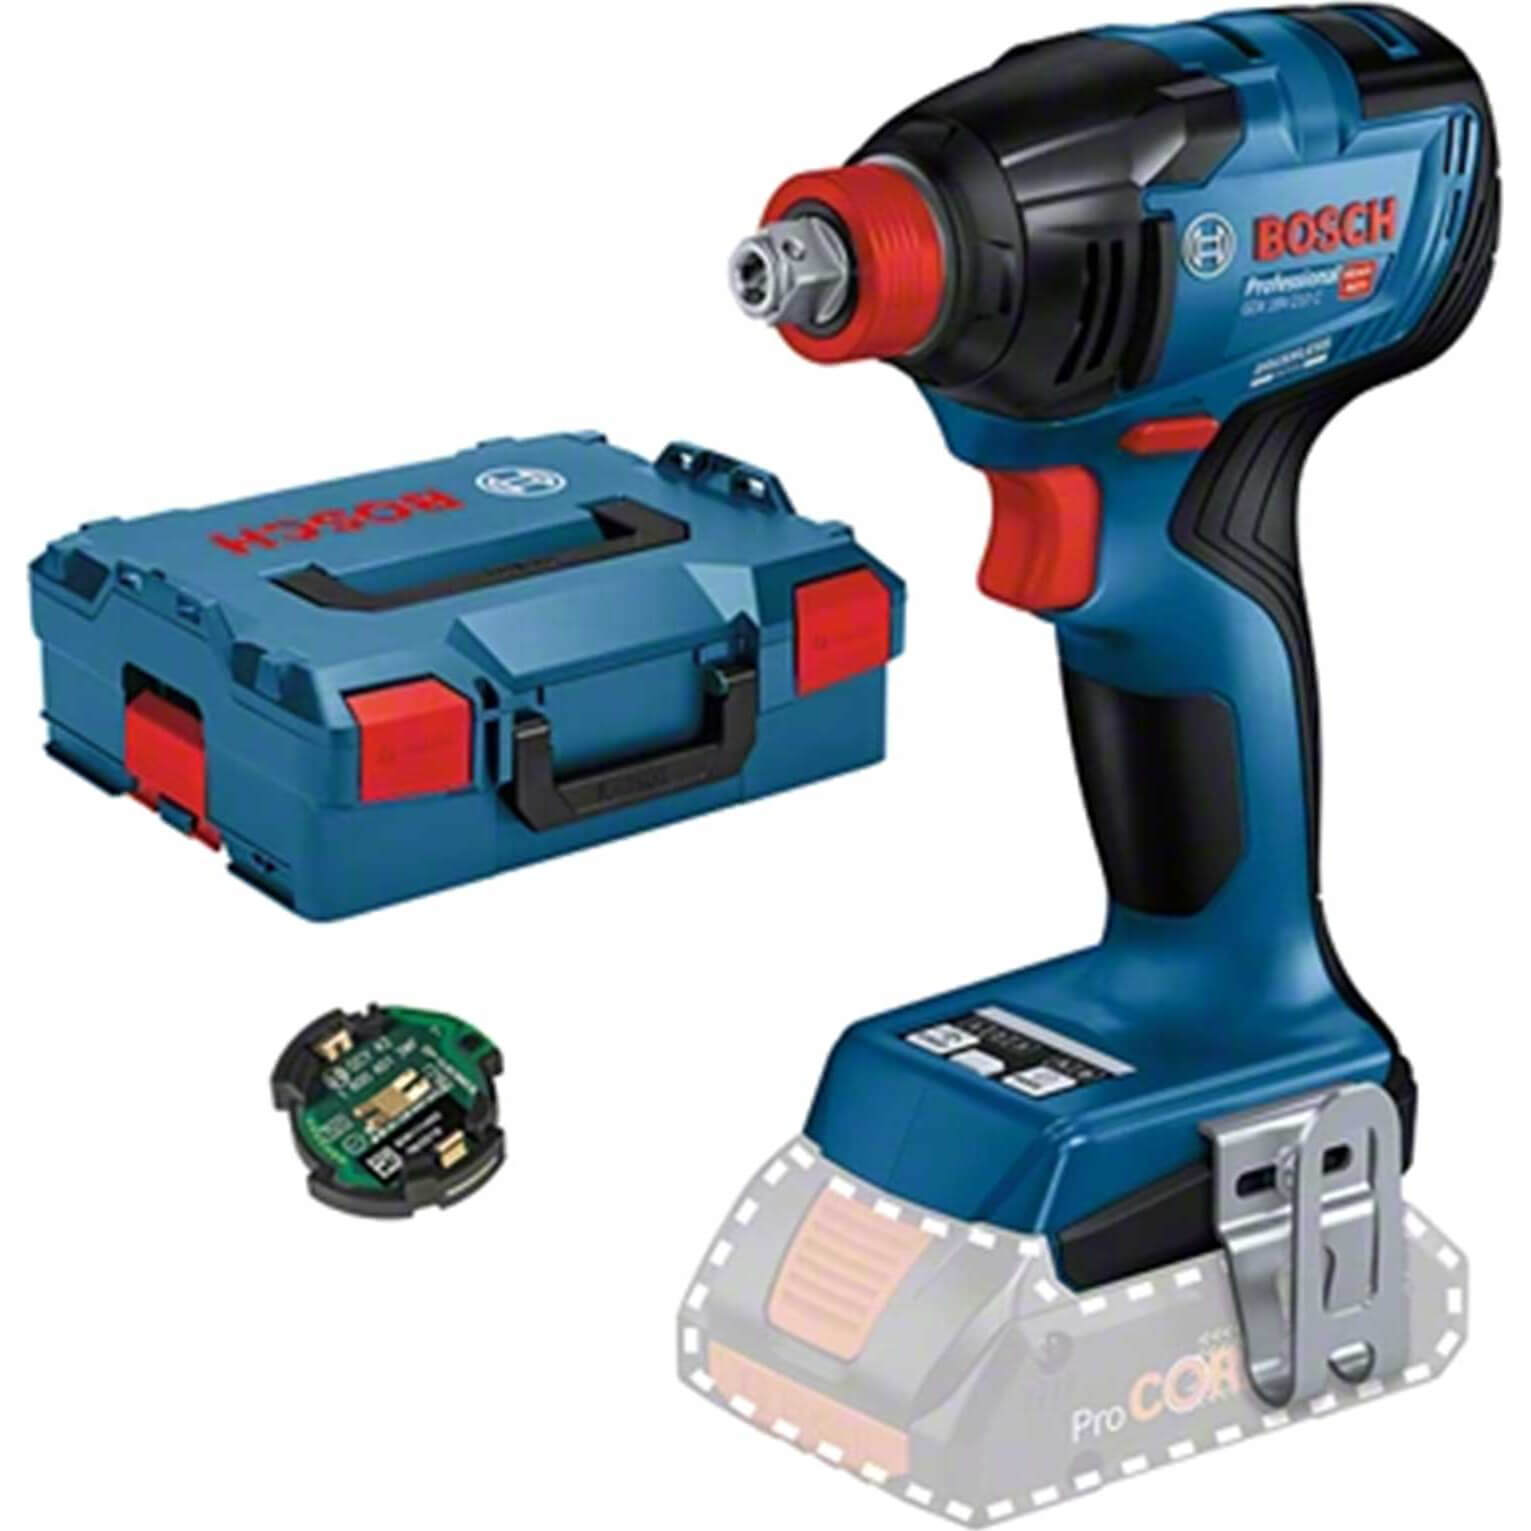 Bosch GDX 18V-210 C Connected 18v Cordless Impact Wrench / Driver No Batteries No Charger Case